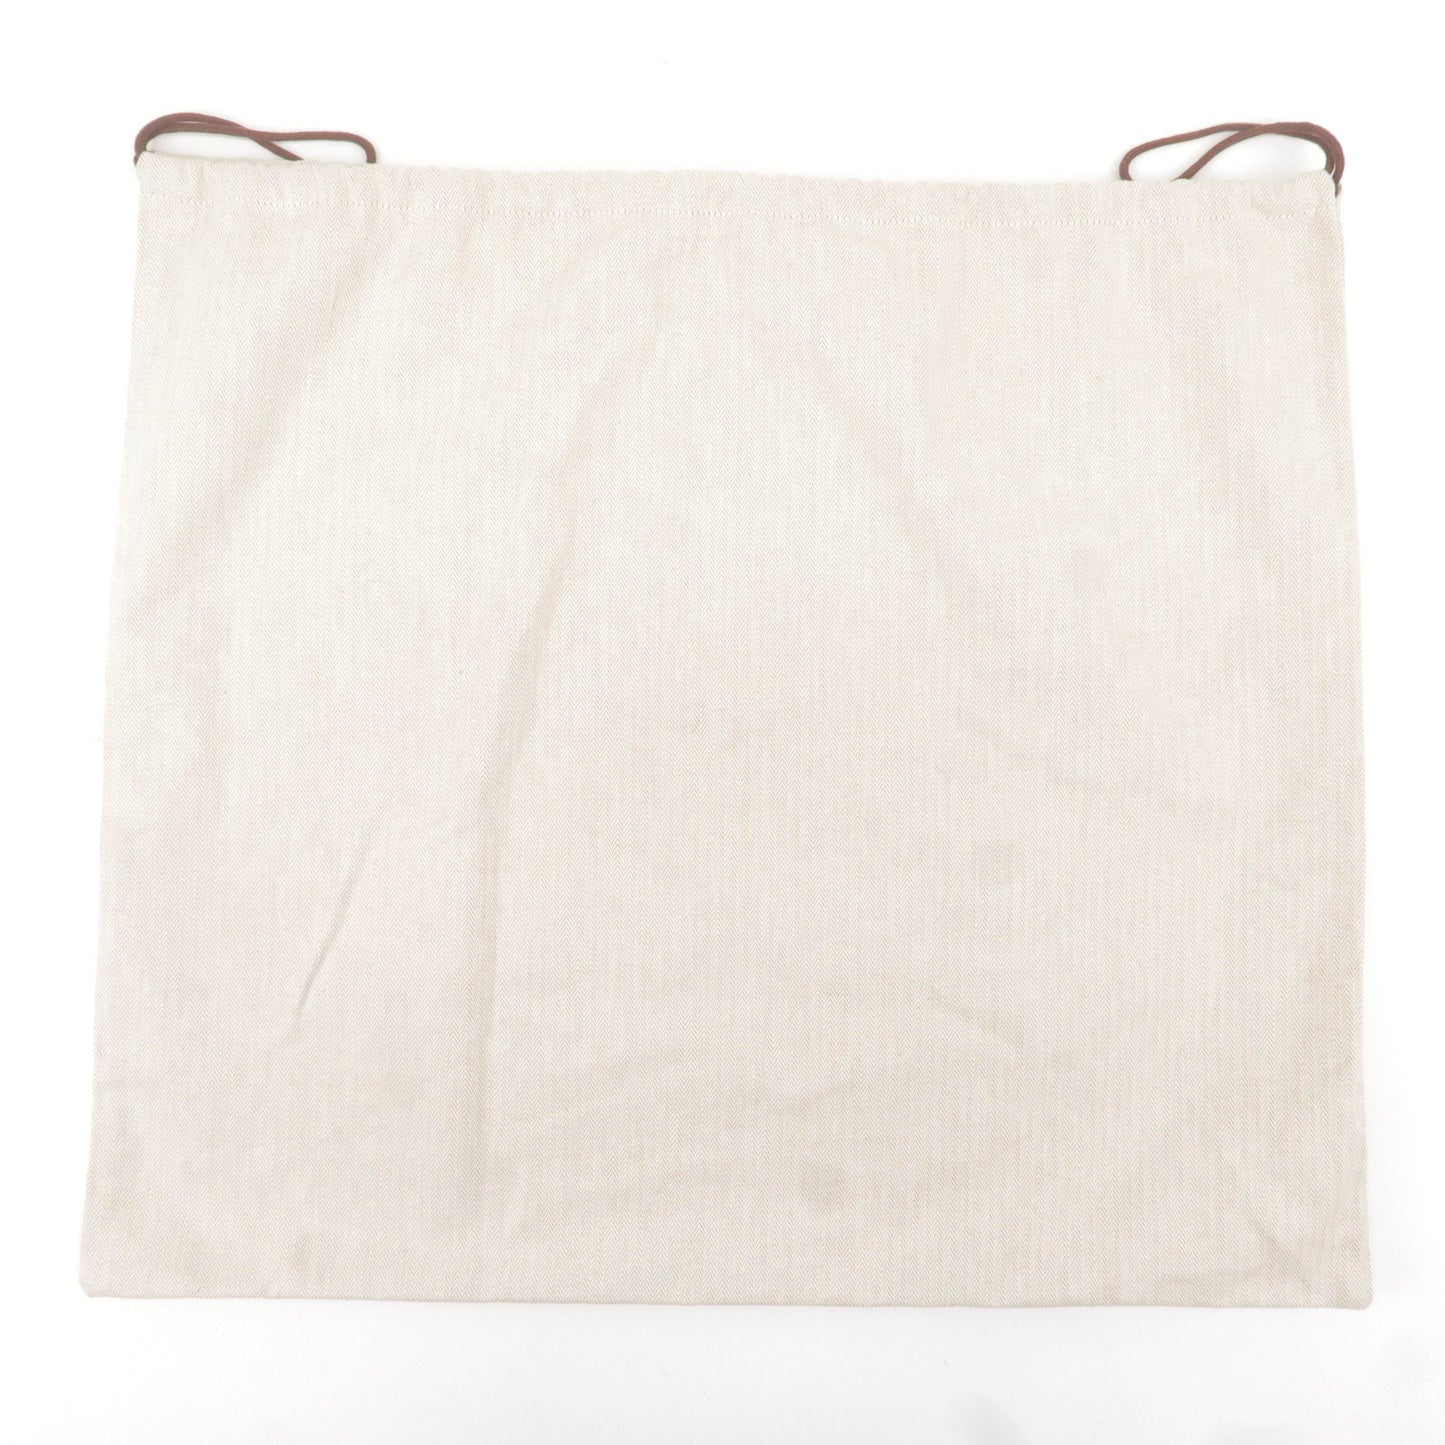 White Brushed Twill Fabric Reusable Dust Bag For Handbag - Buy Fabric Handbag  Dust Bags,Dust Bags For Purses,Reusable Dust Bag.